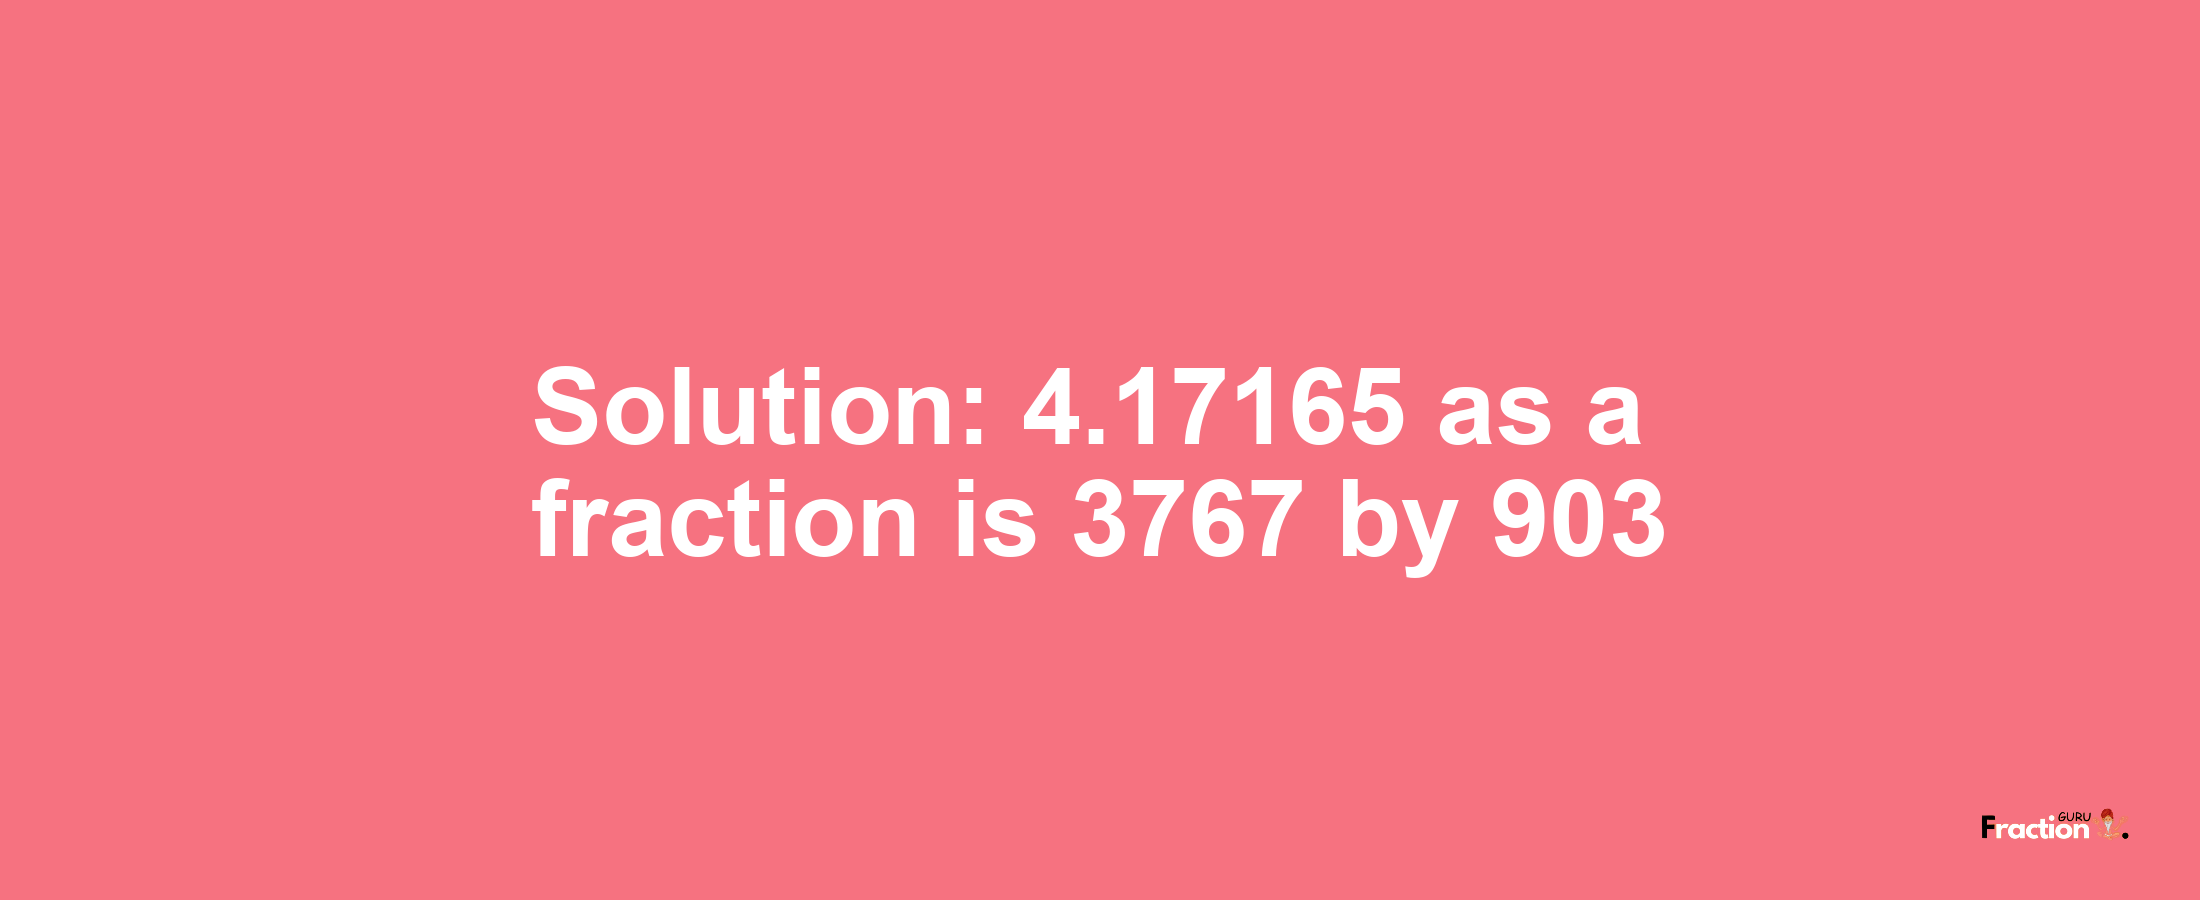 Solution:4.17165 as a fraction is 3767/903